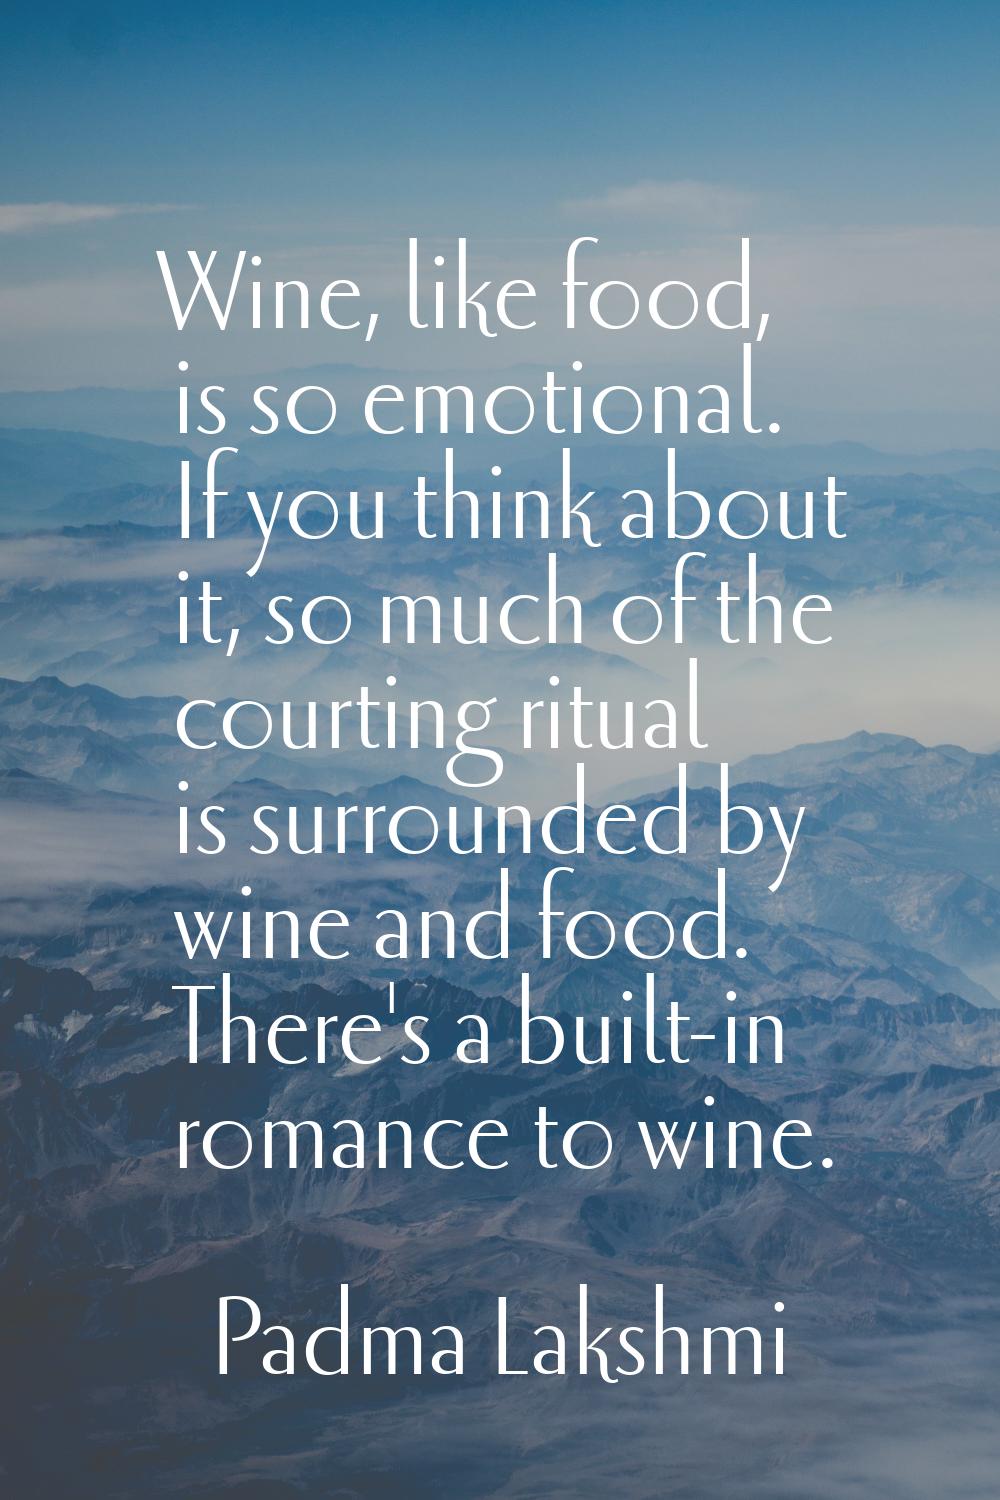 Wine, like food, is so emotional. If you think about it, so much of the courting ritual is surround